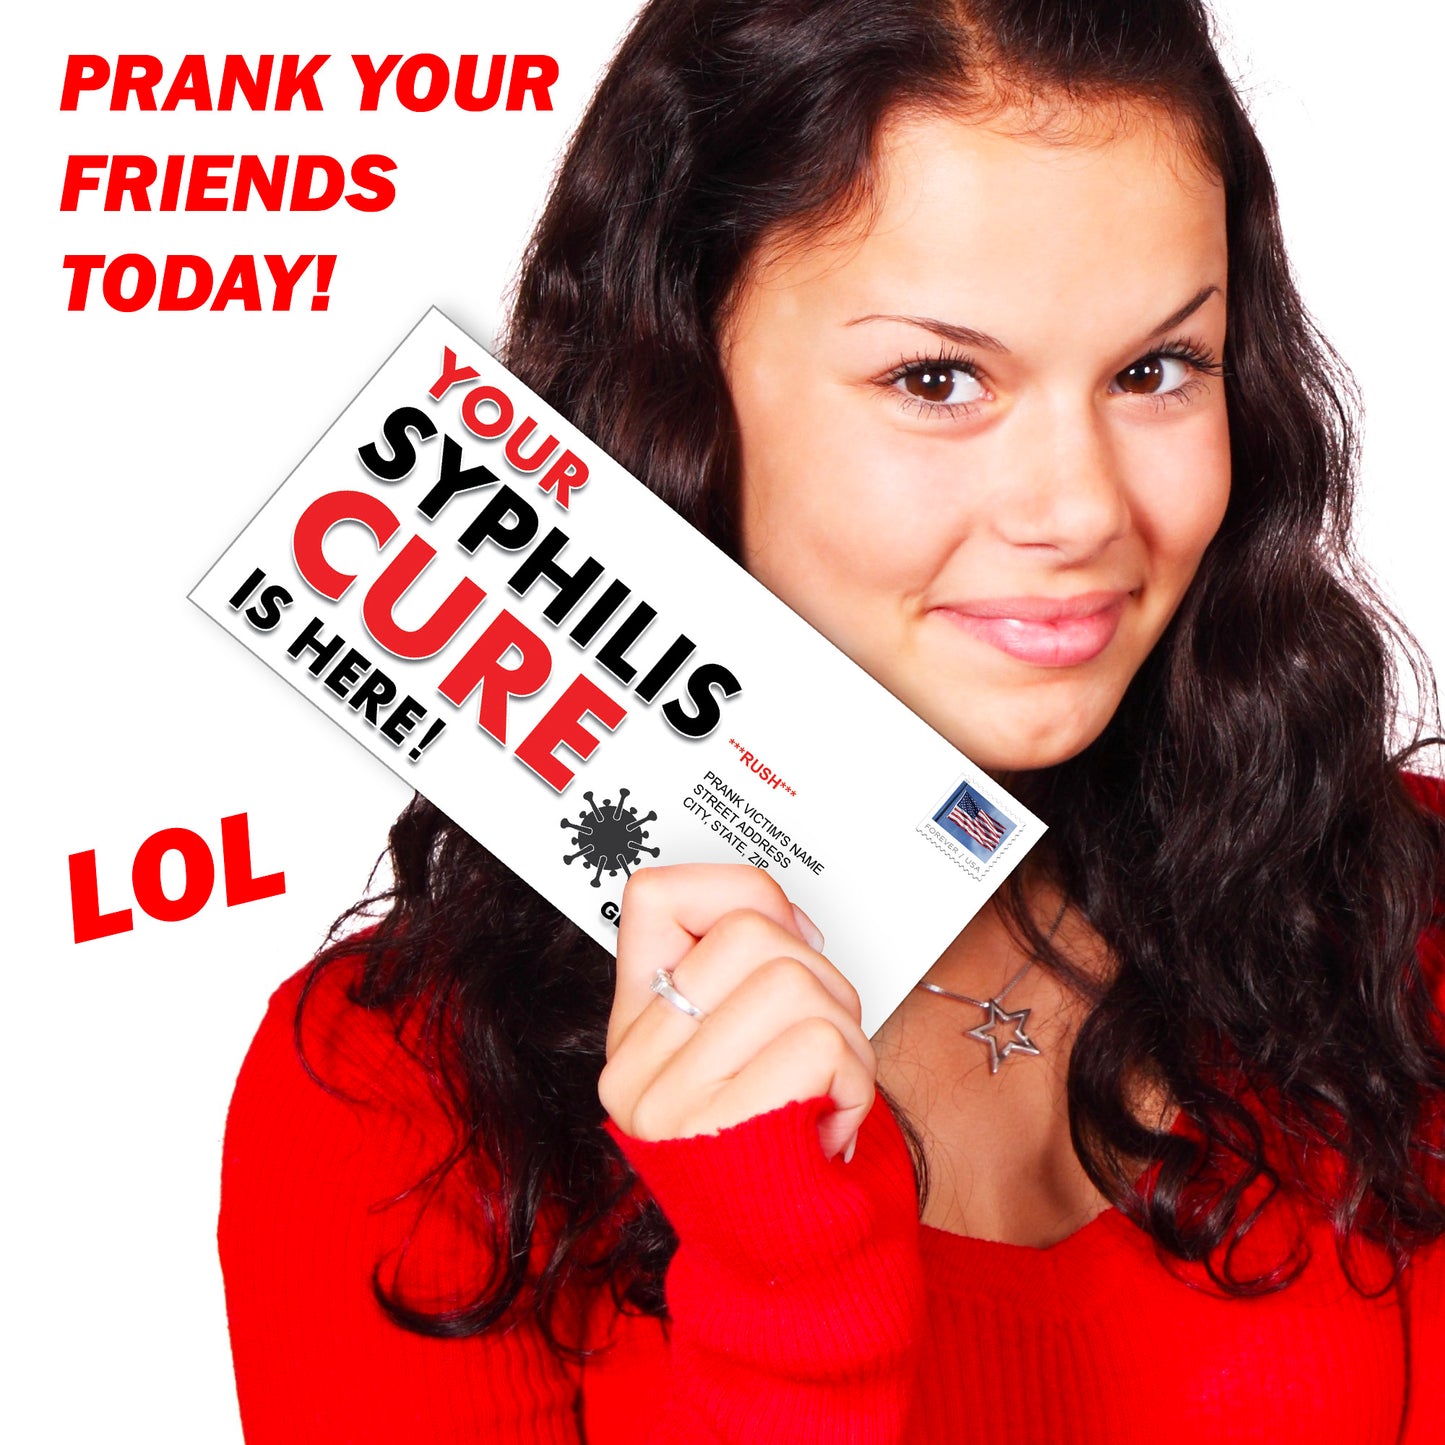 Syphilis Cure Anonymous Mail Prank Letter